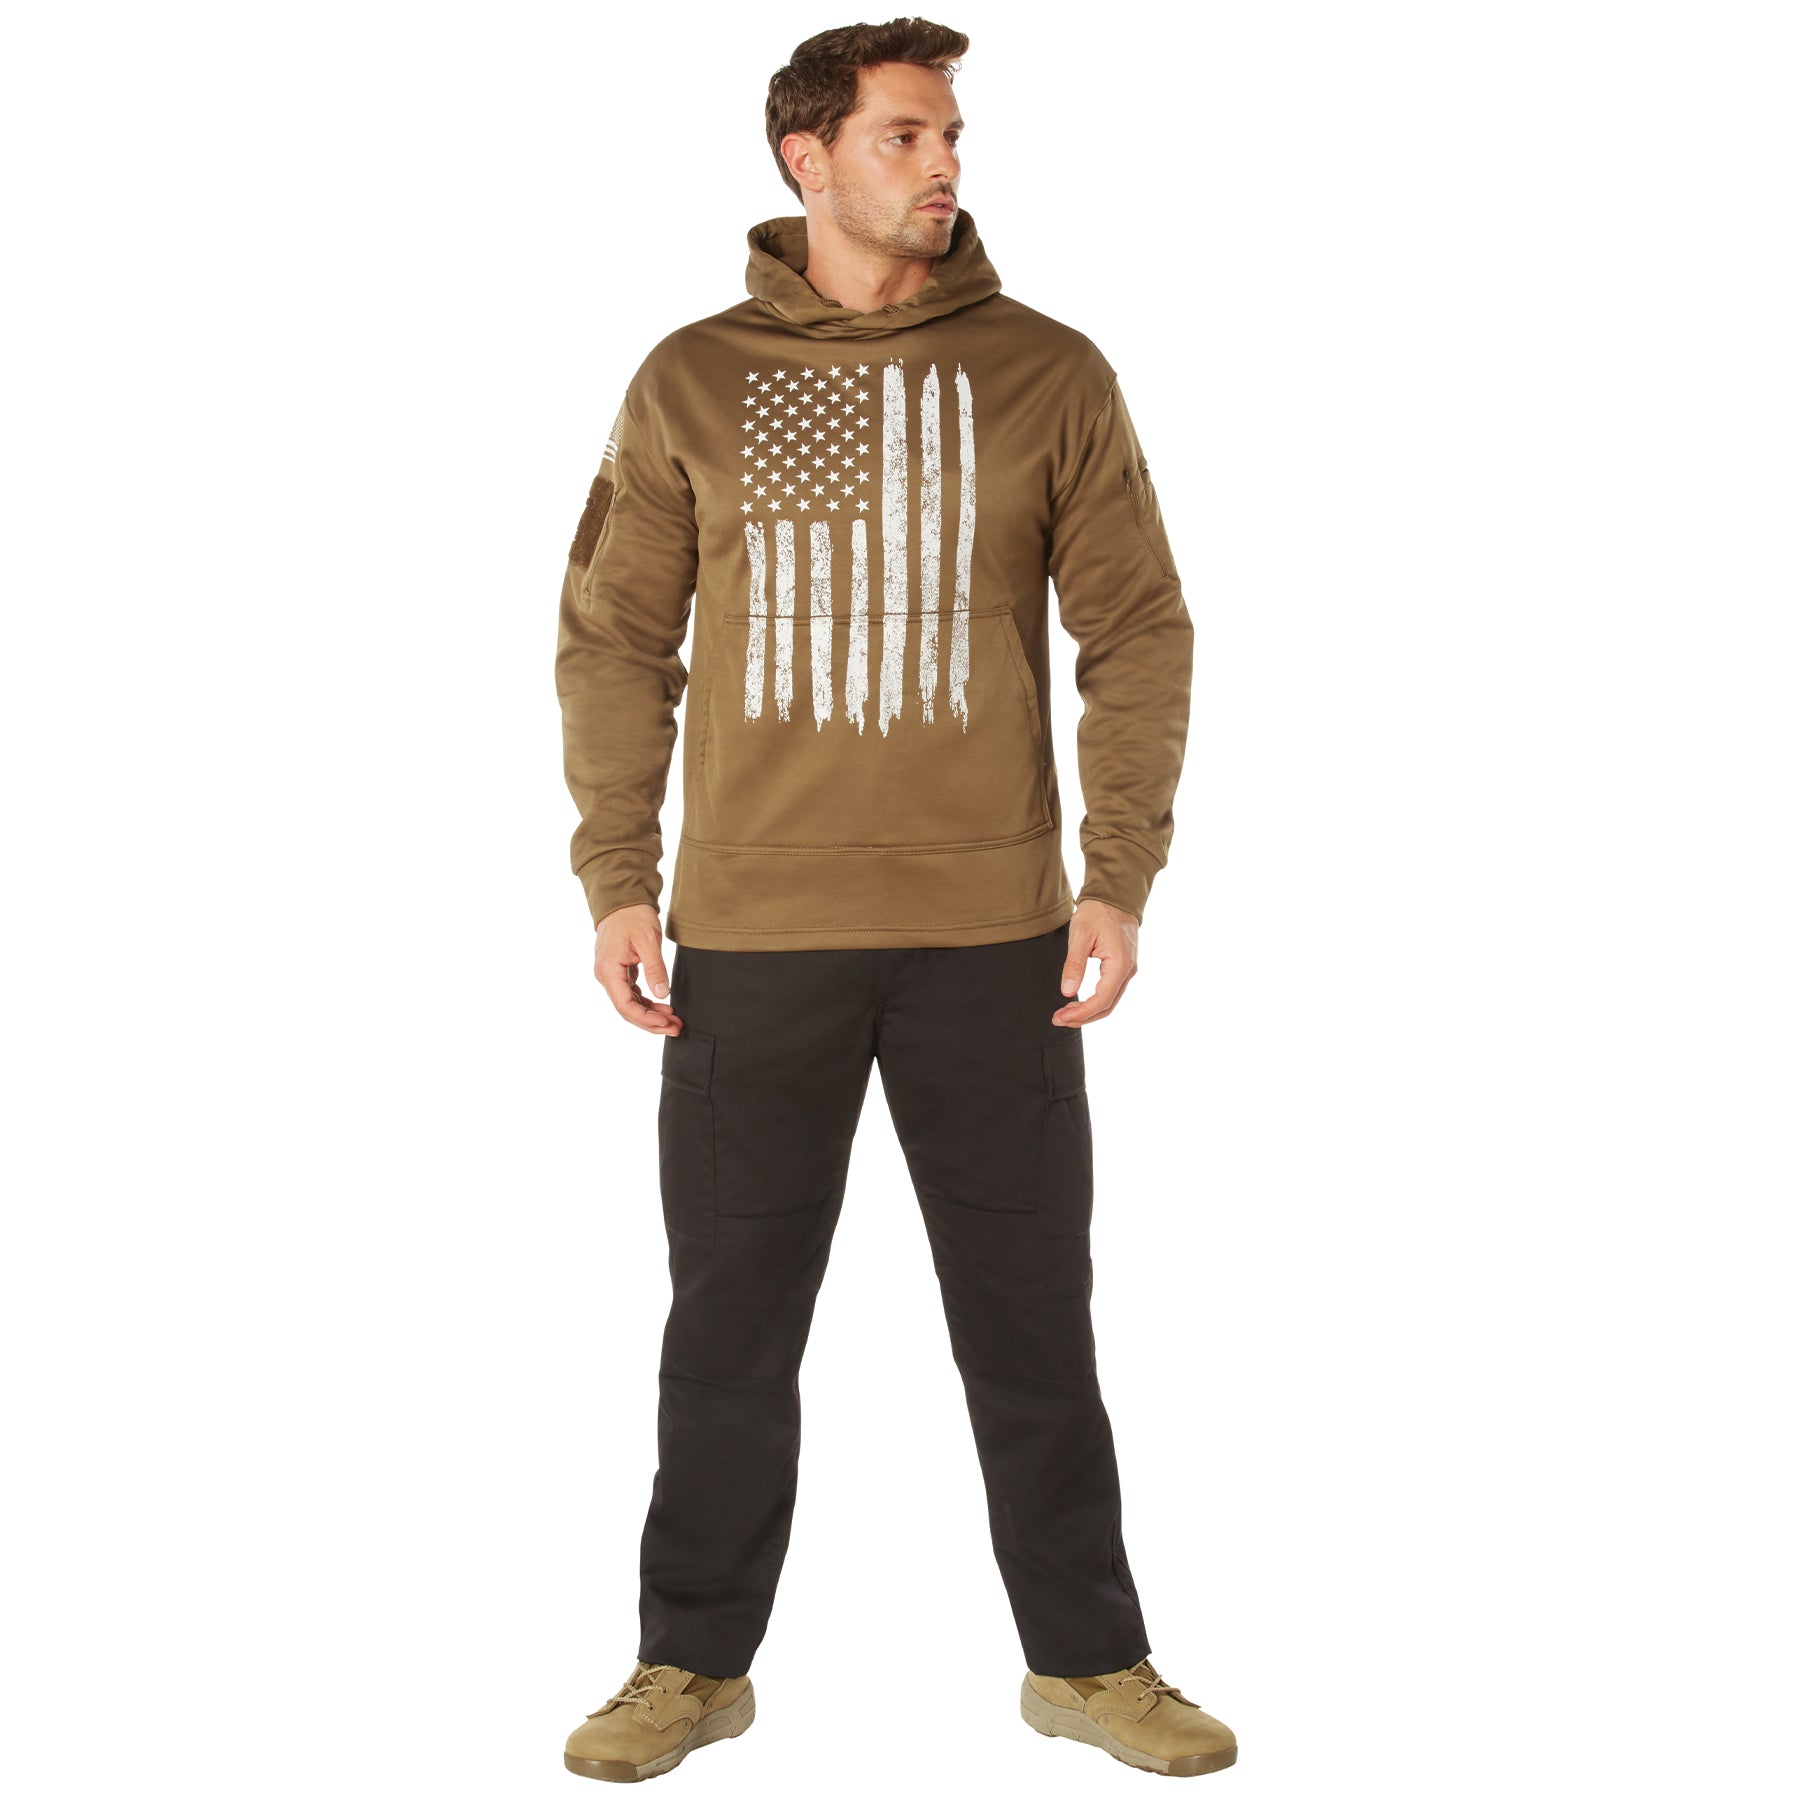 Poly US Flag Concealed Carry Hooded Sweatshirts